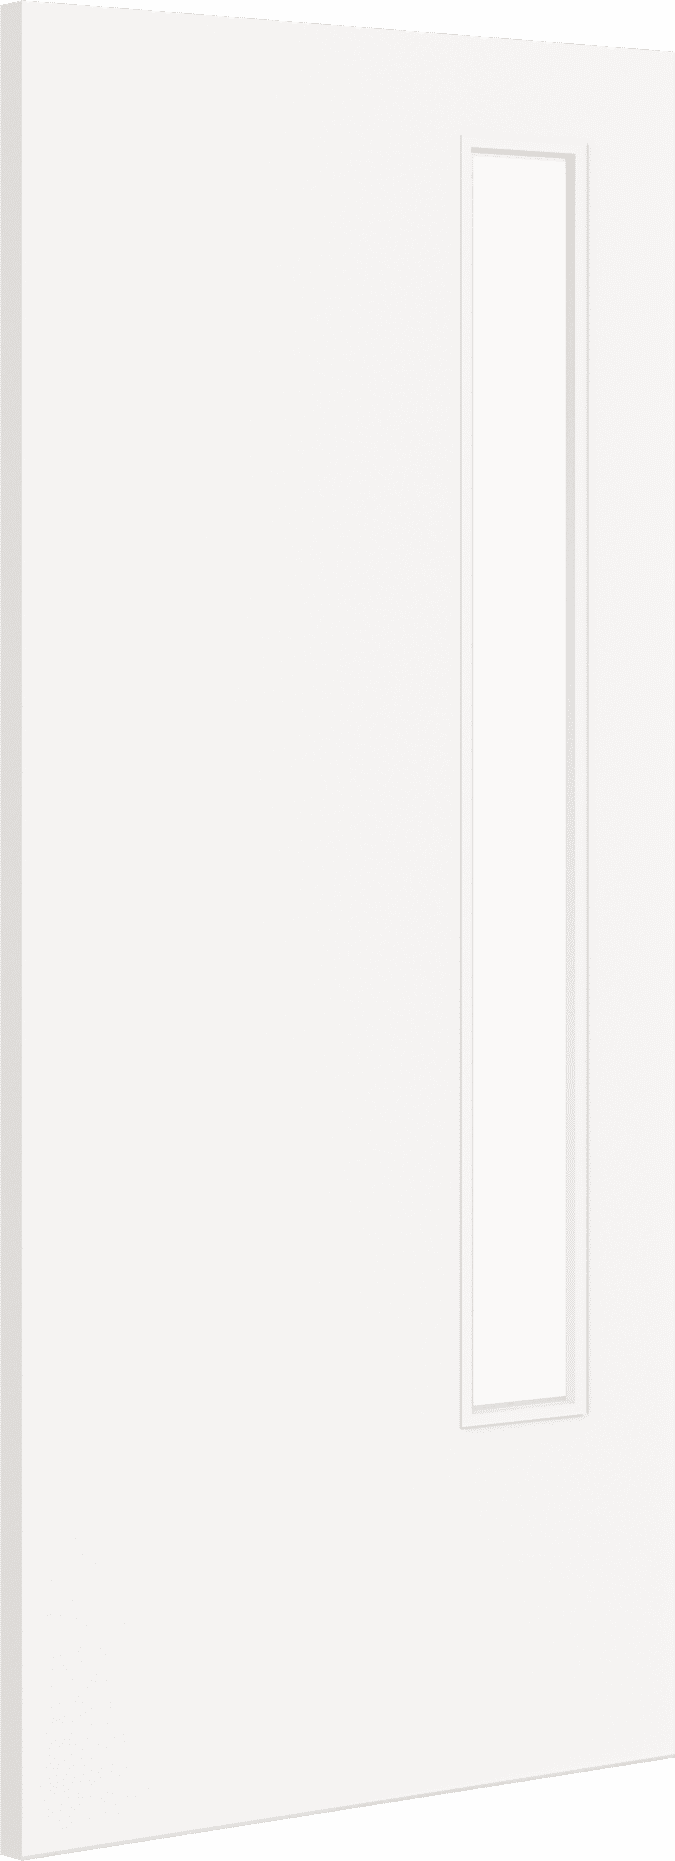 1981mm x 686mm x 44mm (27") Architectural Paint Grade White 13 Clear Glazed Fire Door Blank